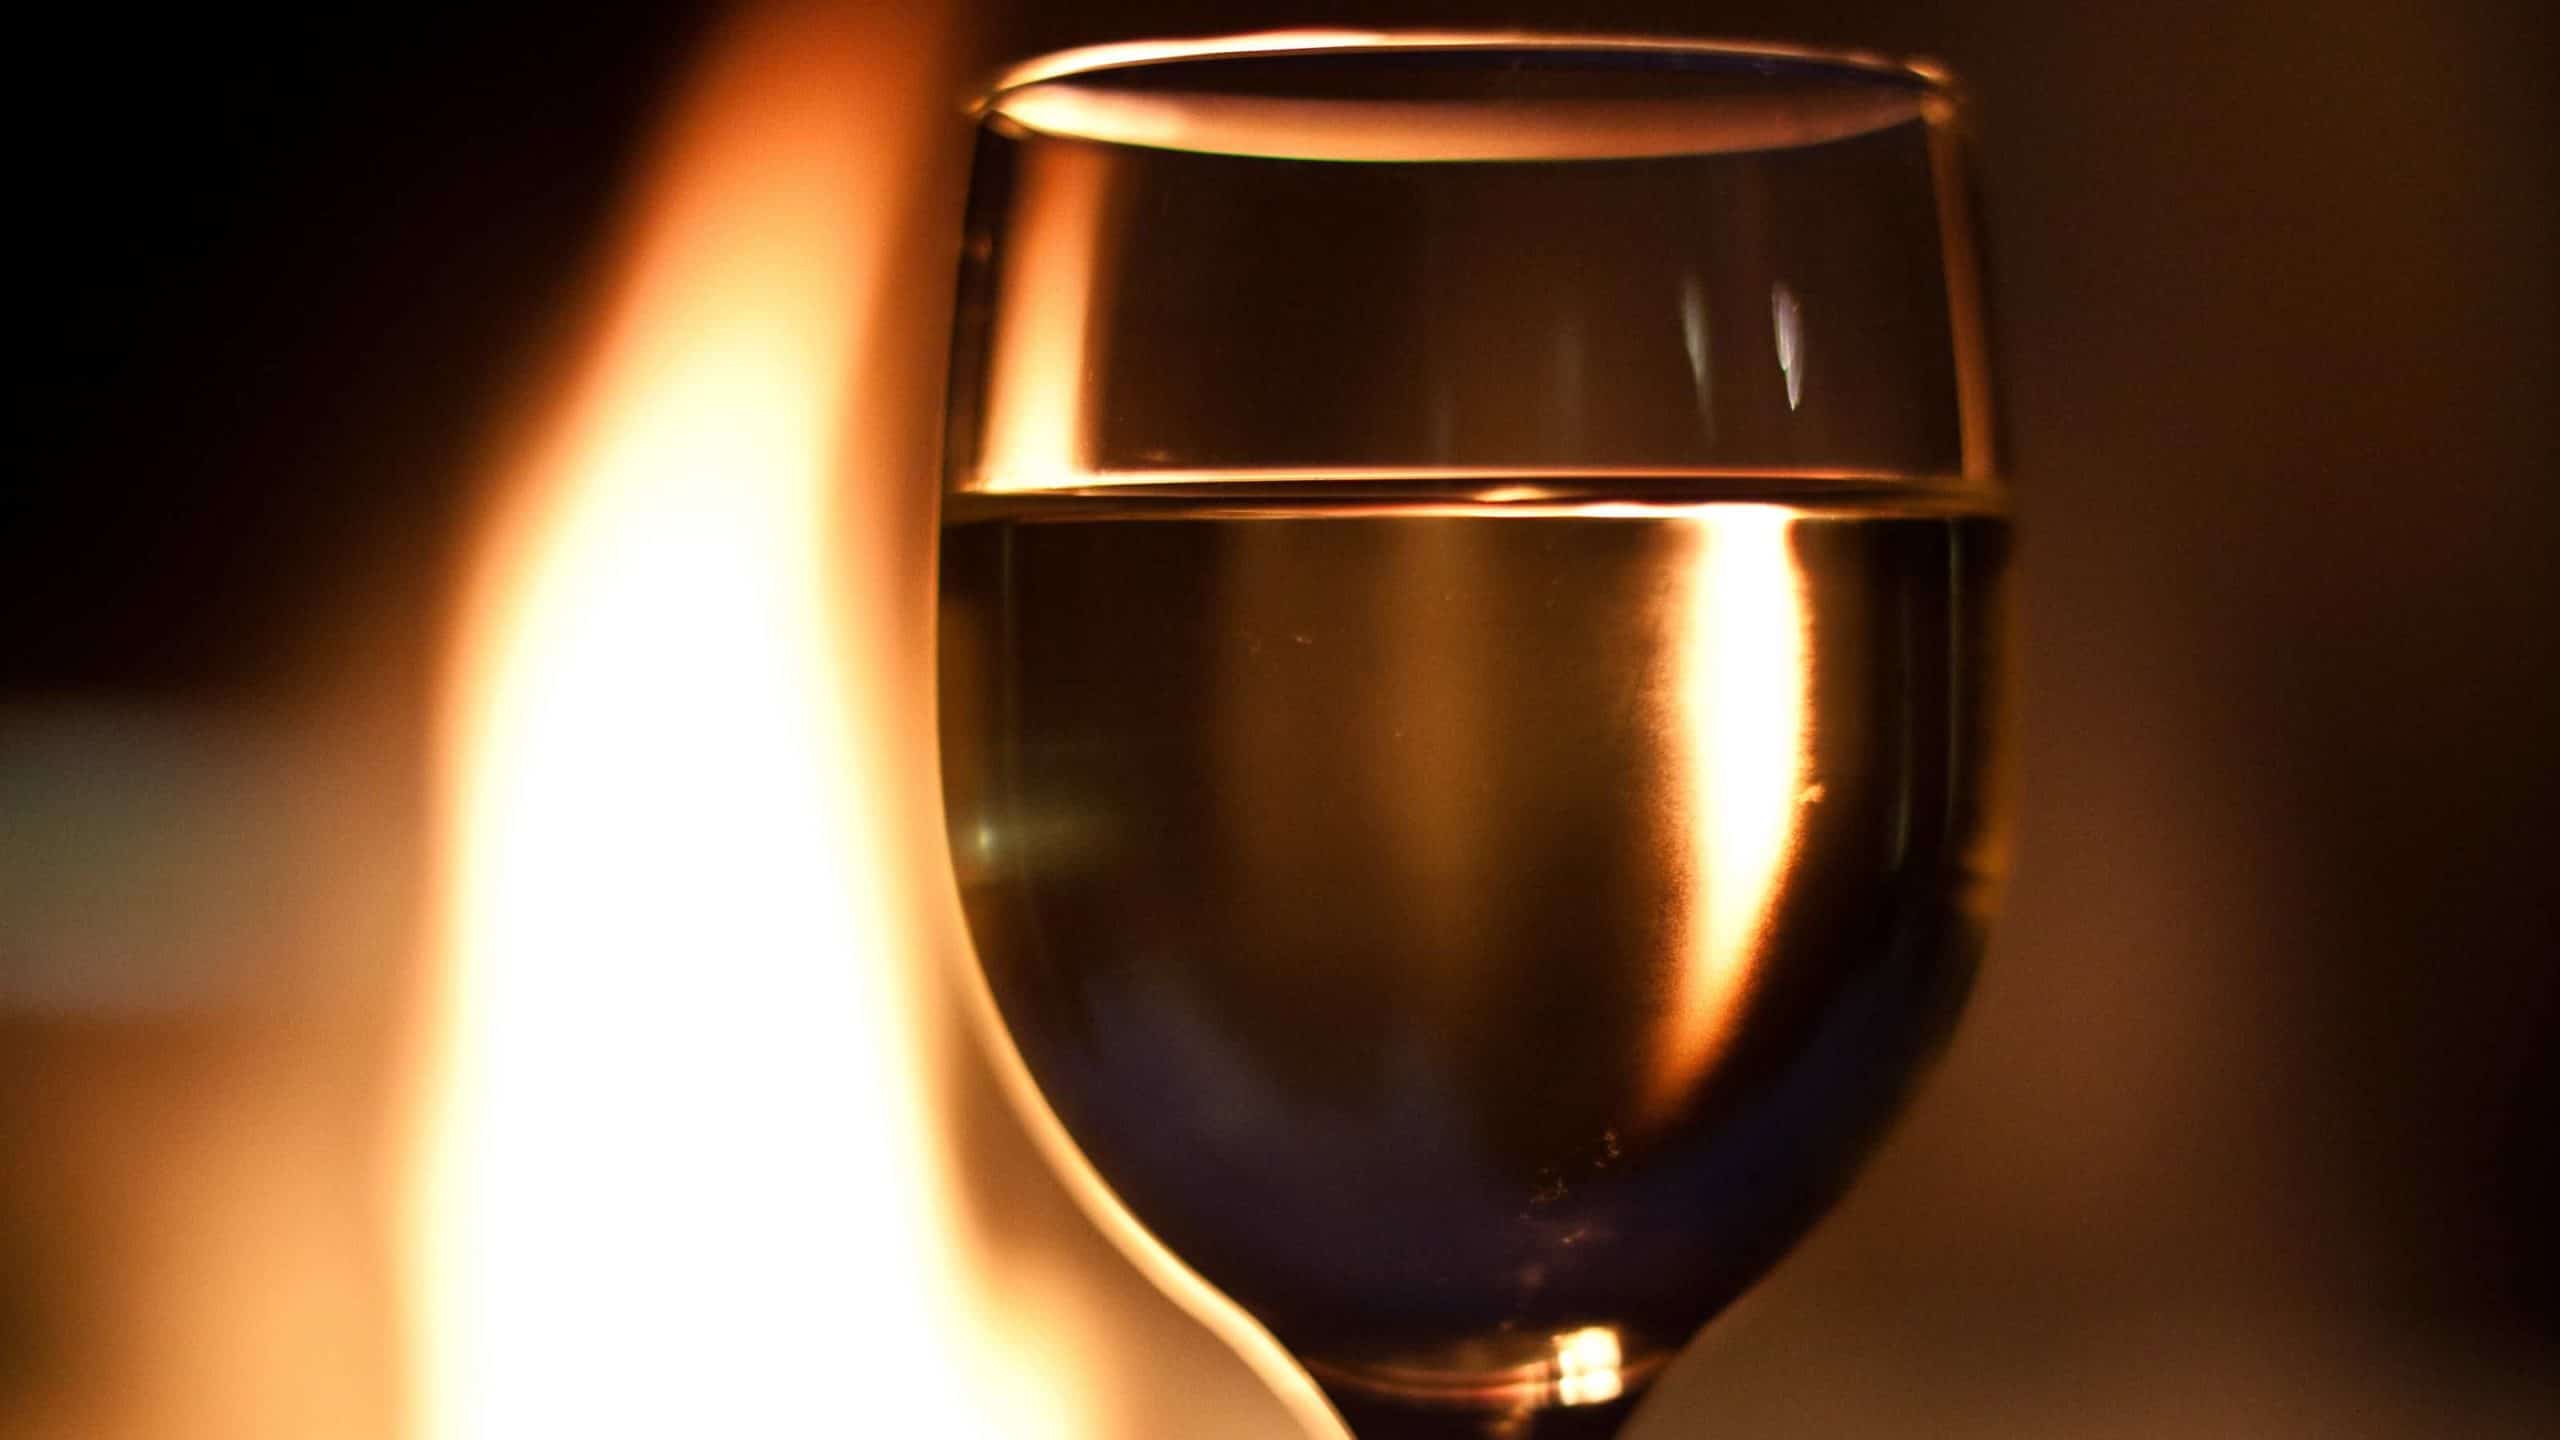 A glass of white wine glows in firelight. Creative Commons courtesy photo